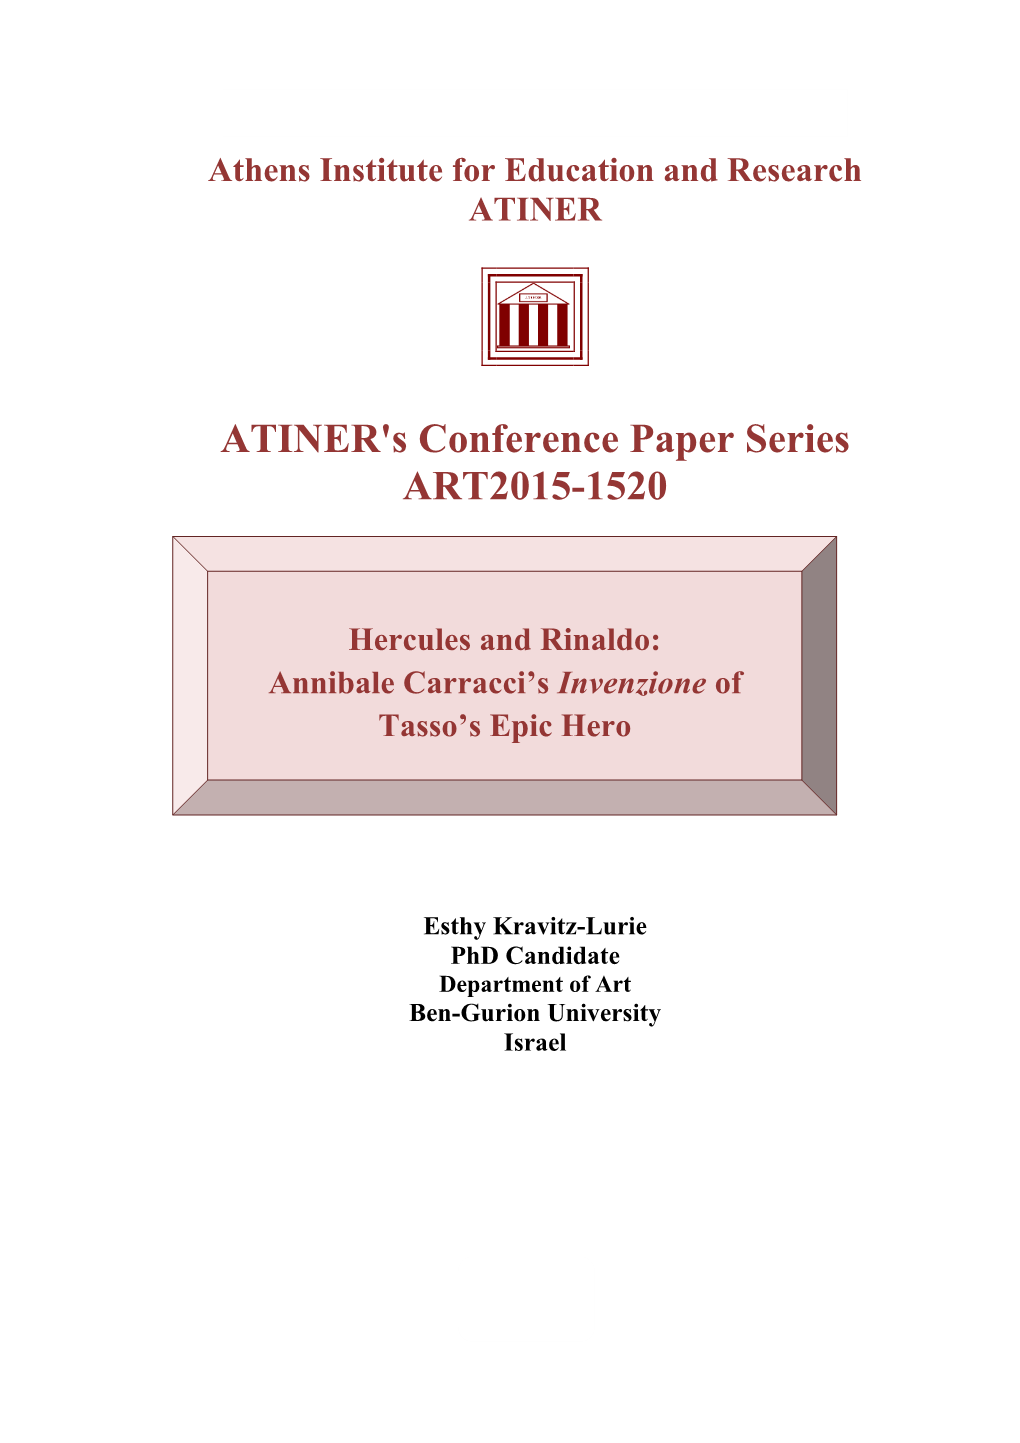 ATINER's Conference Paper Series ART2015-1520